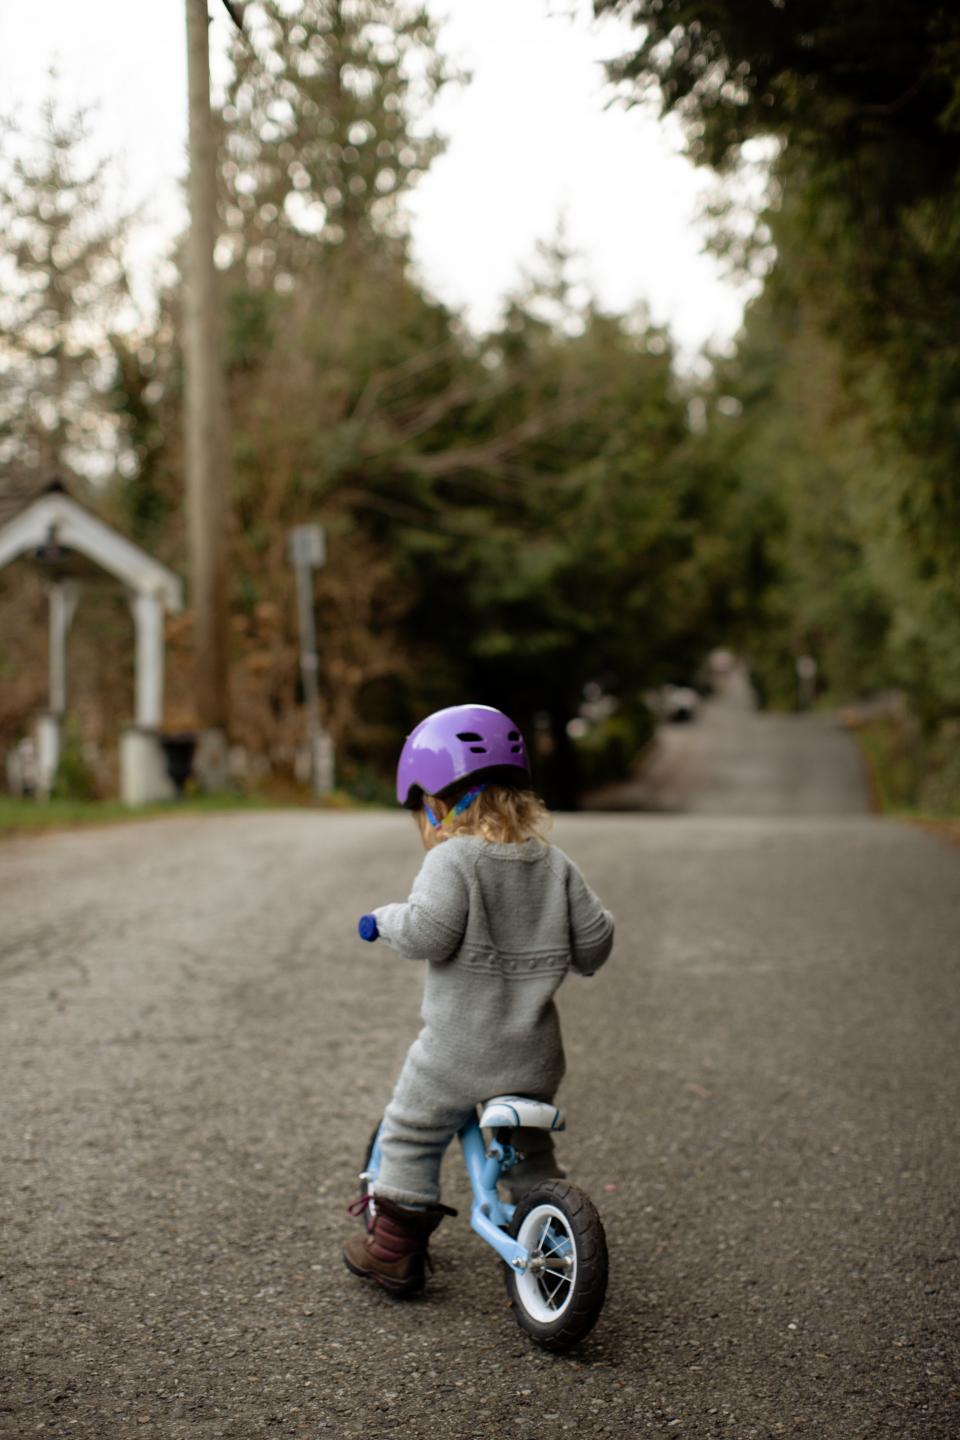 Child on bicycle with helmet